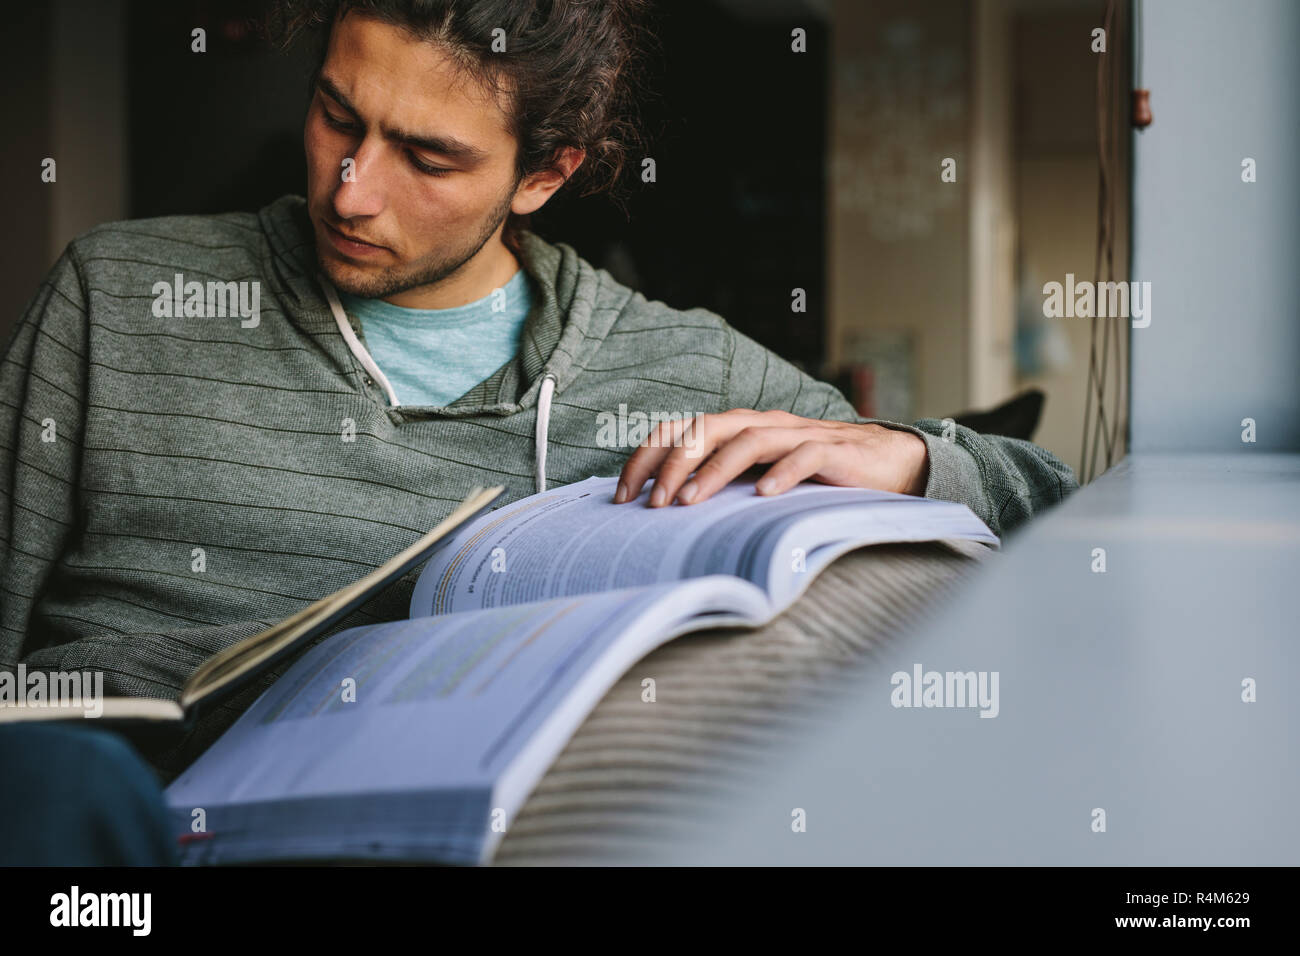 Student making notes from a reference book sitting on a couch. Young man studying seriously sitting at home. Stock Photo